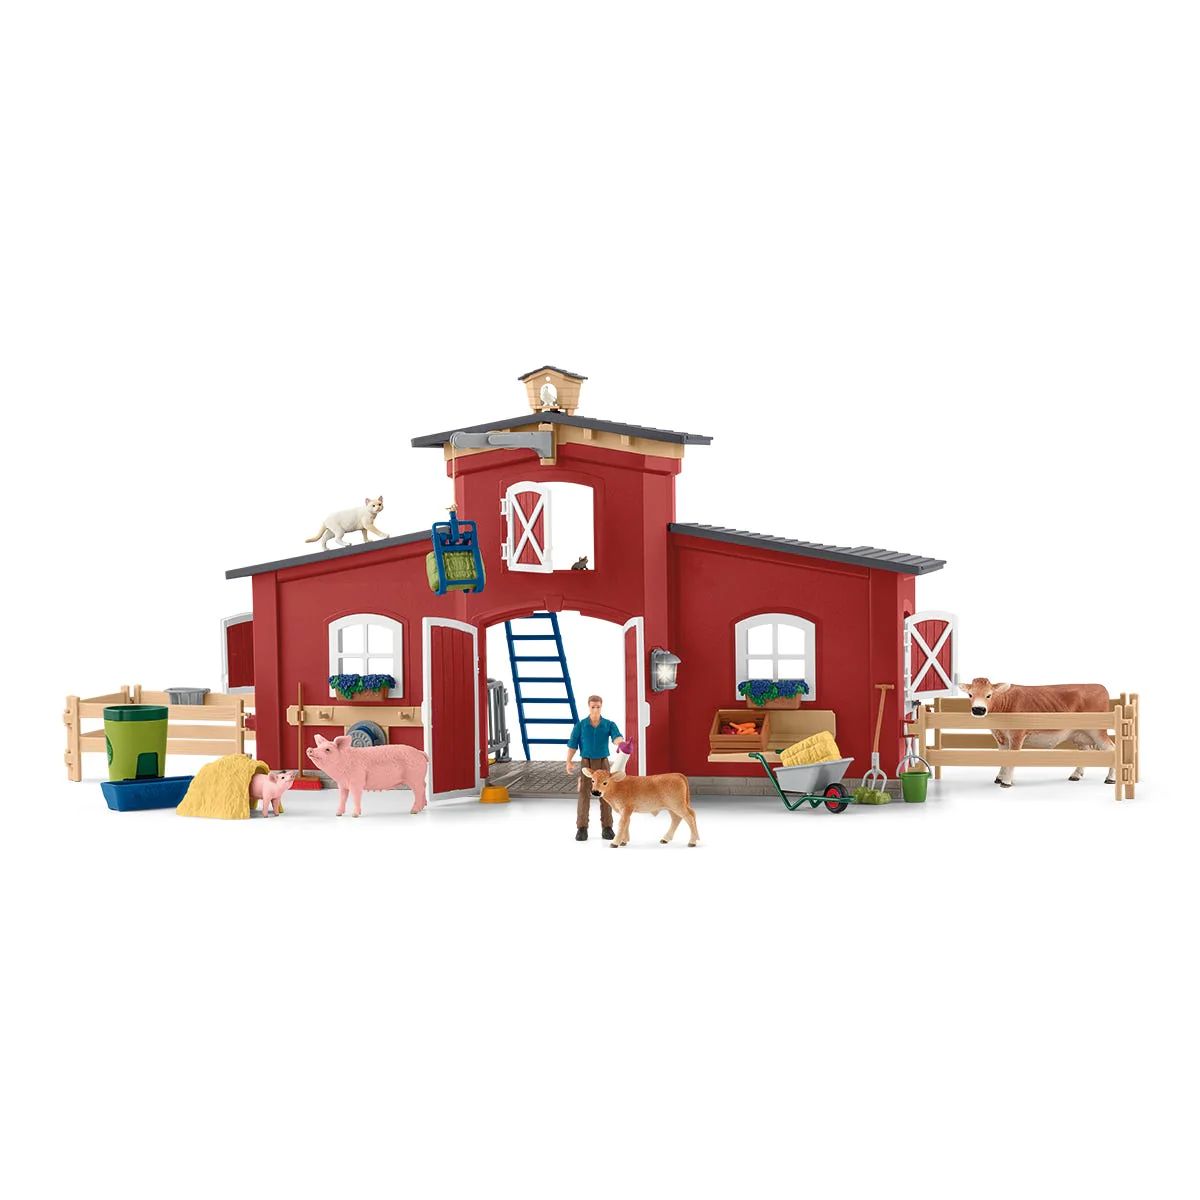 Large Barn with Animals and Accessories | Schleich USA Inc.